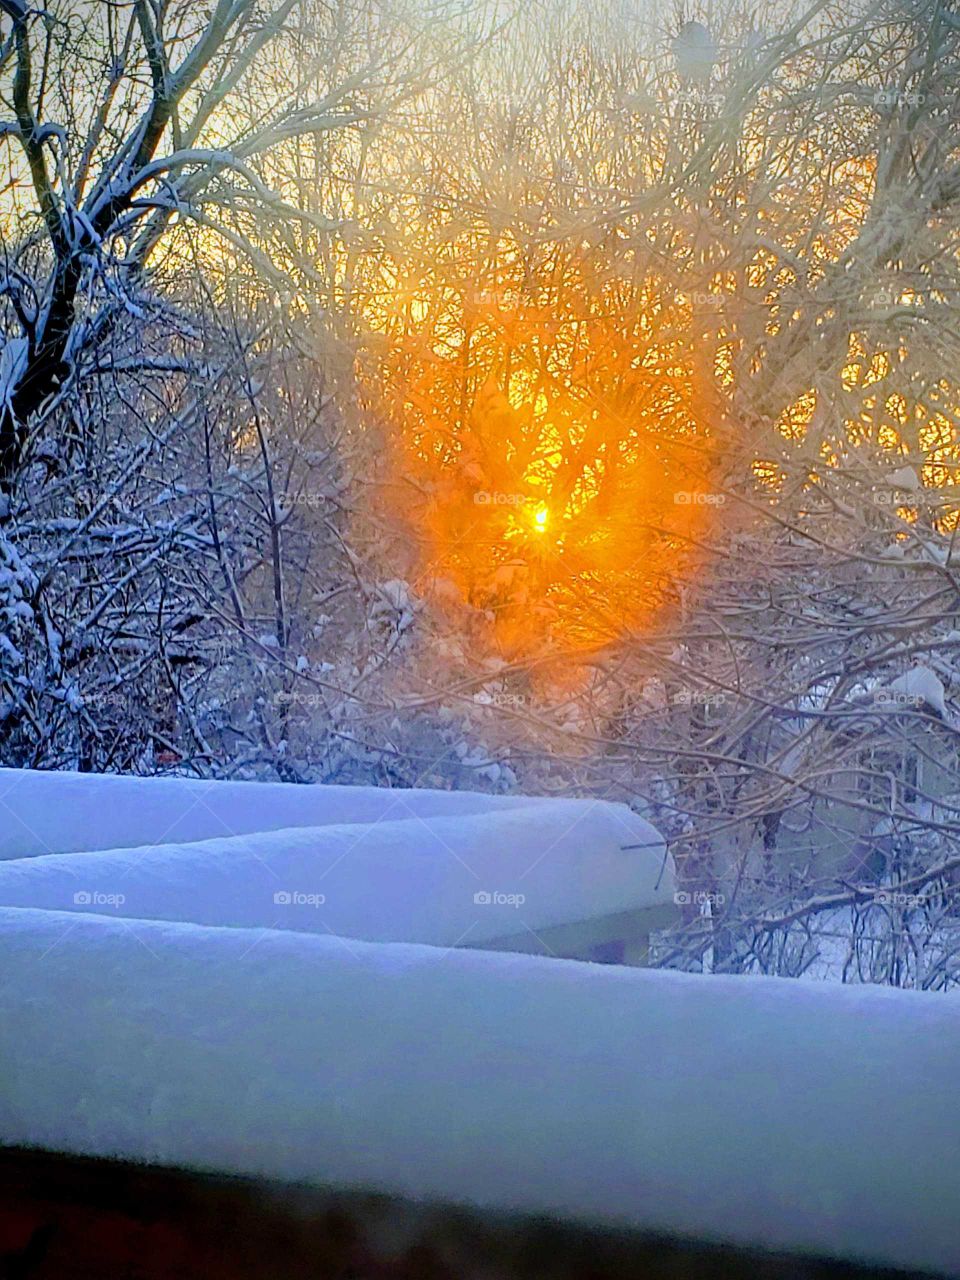 Winter's snowy morning calling organge sunrise back drop of leaf less trees waiting for Spring